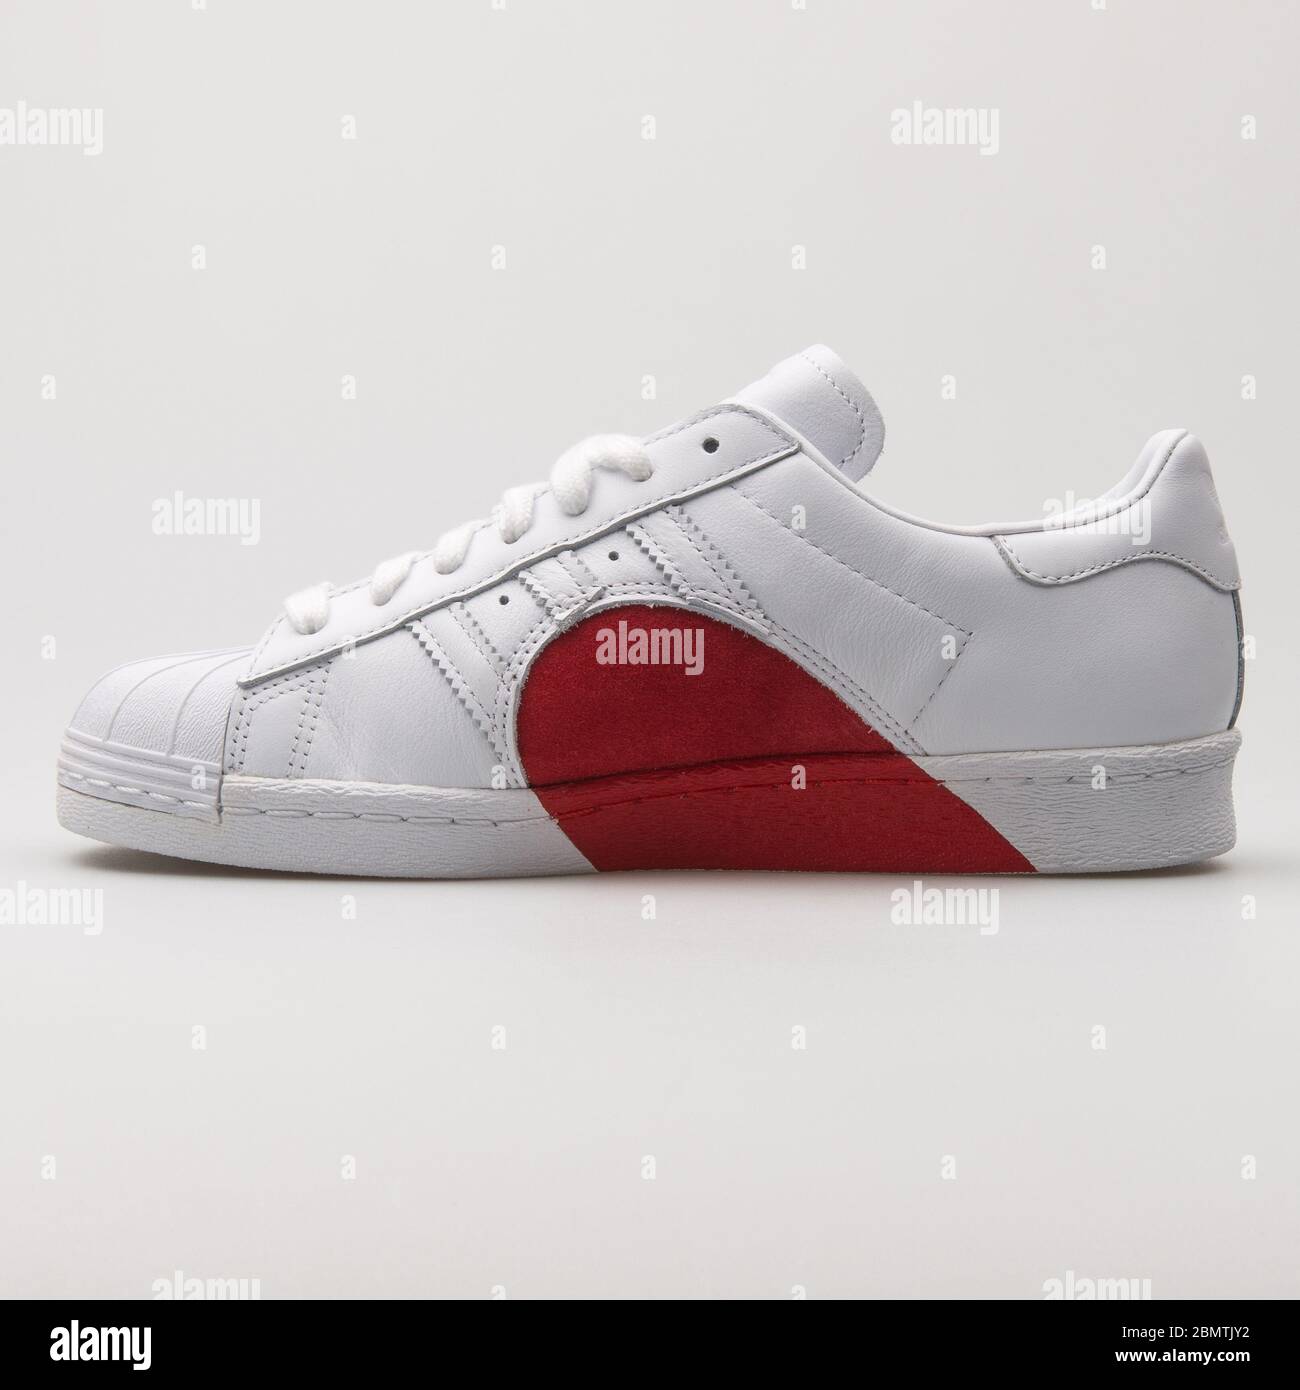 VIENNA, AUSTRIA - 19, 2018: Adidas Superstar HH white and red sneaker on white background Stock Photo - Alamy